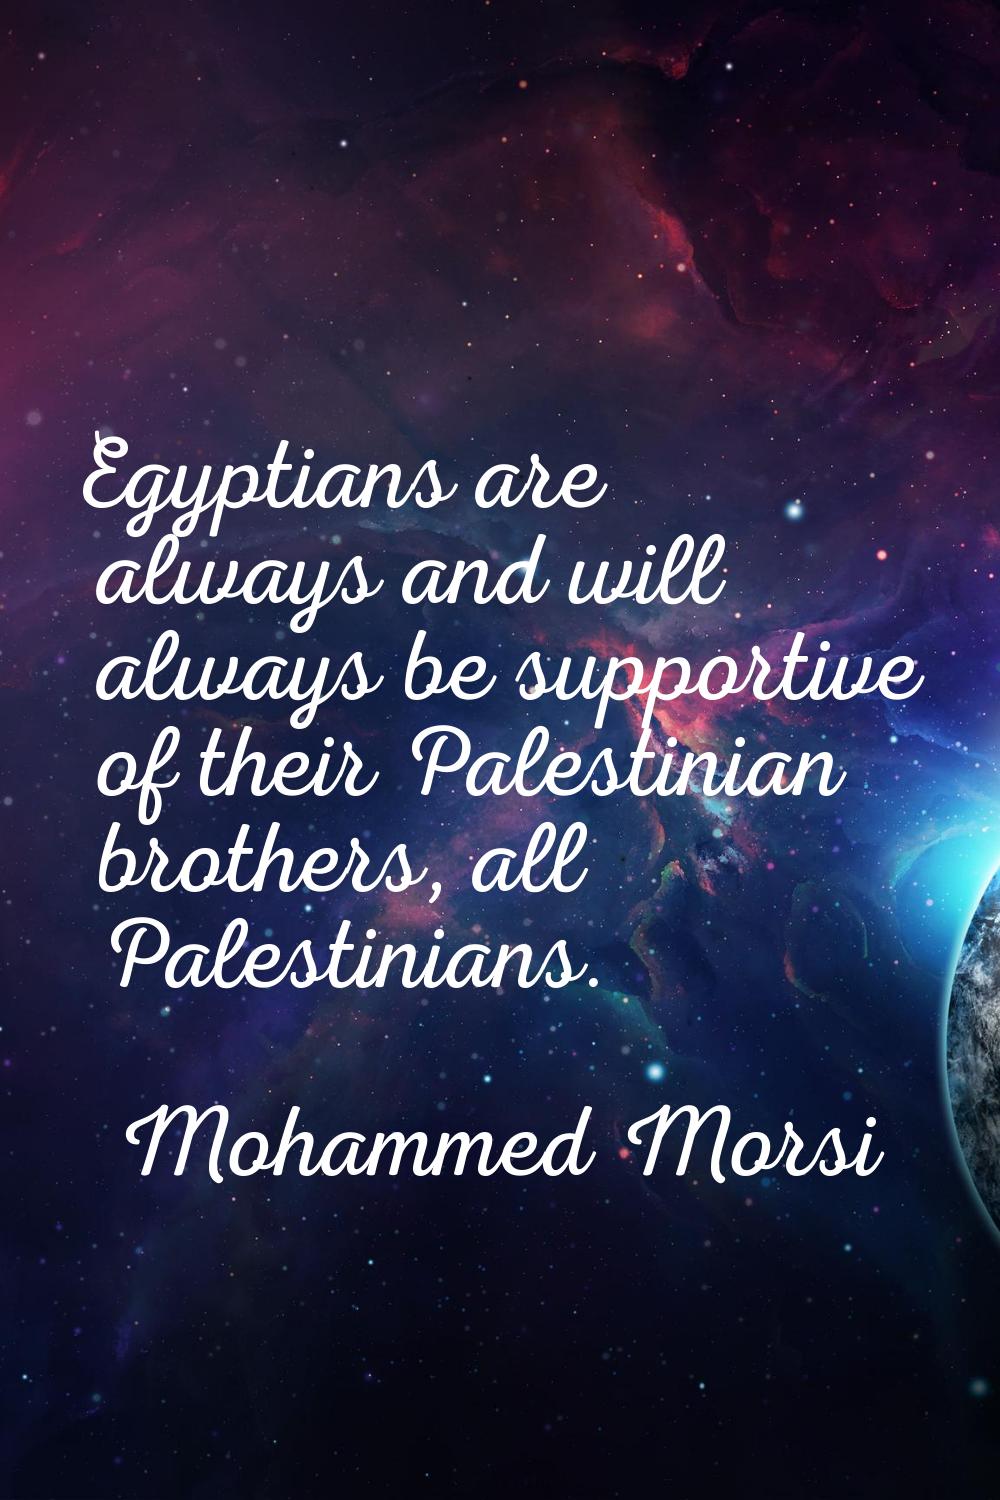 Egyptians are always and will always be supportive of their Palestinian brothers, all Palestinians.